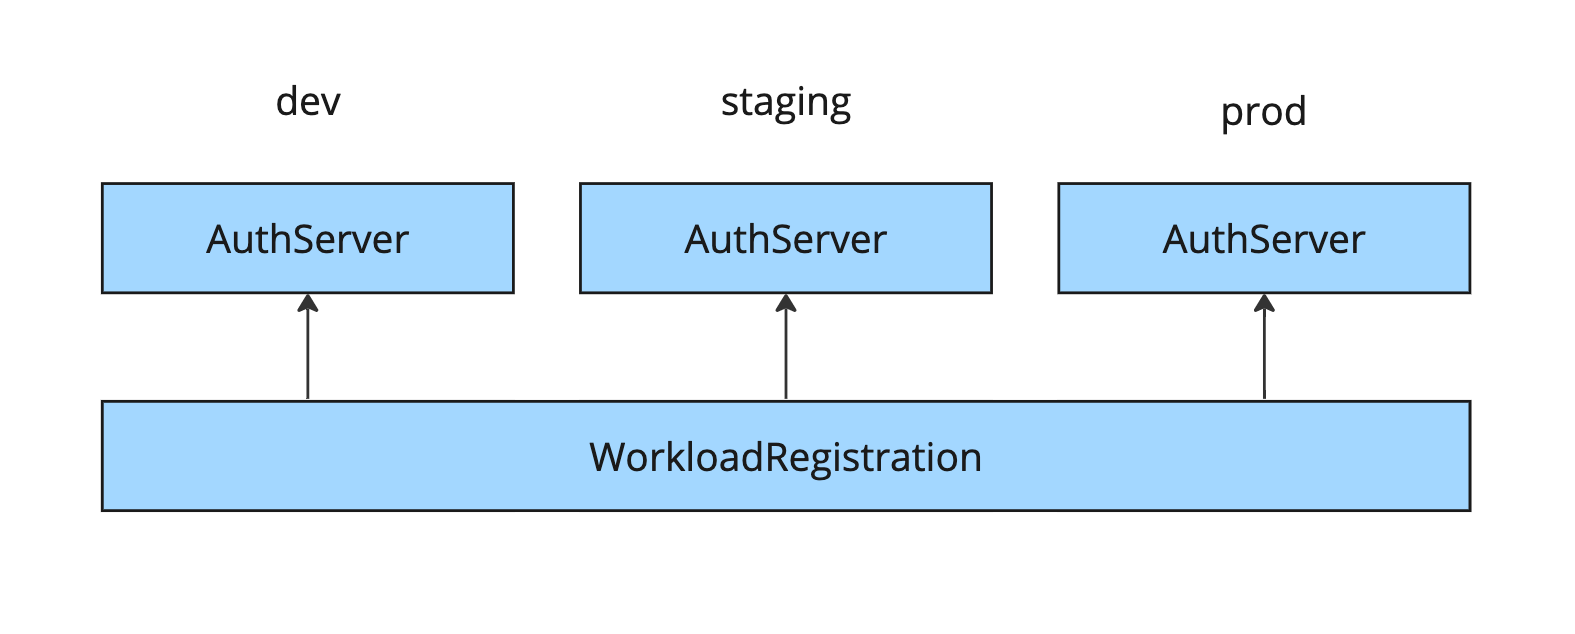 Diagram shows level 2 of AppSSO consumption with WorkloadRegistration.